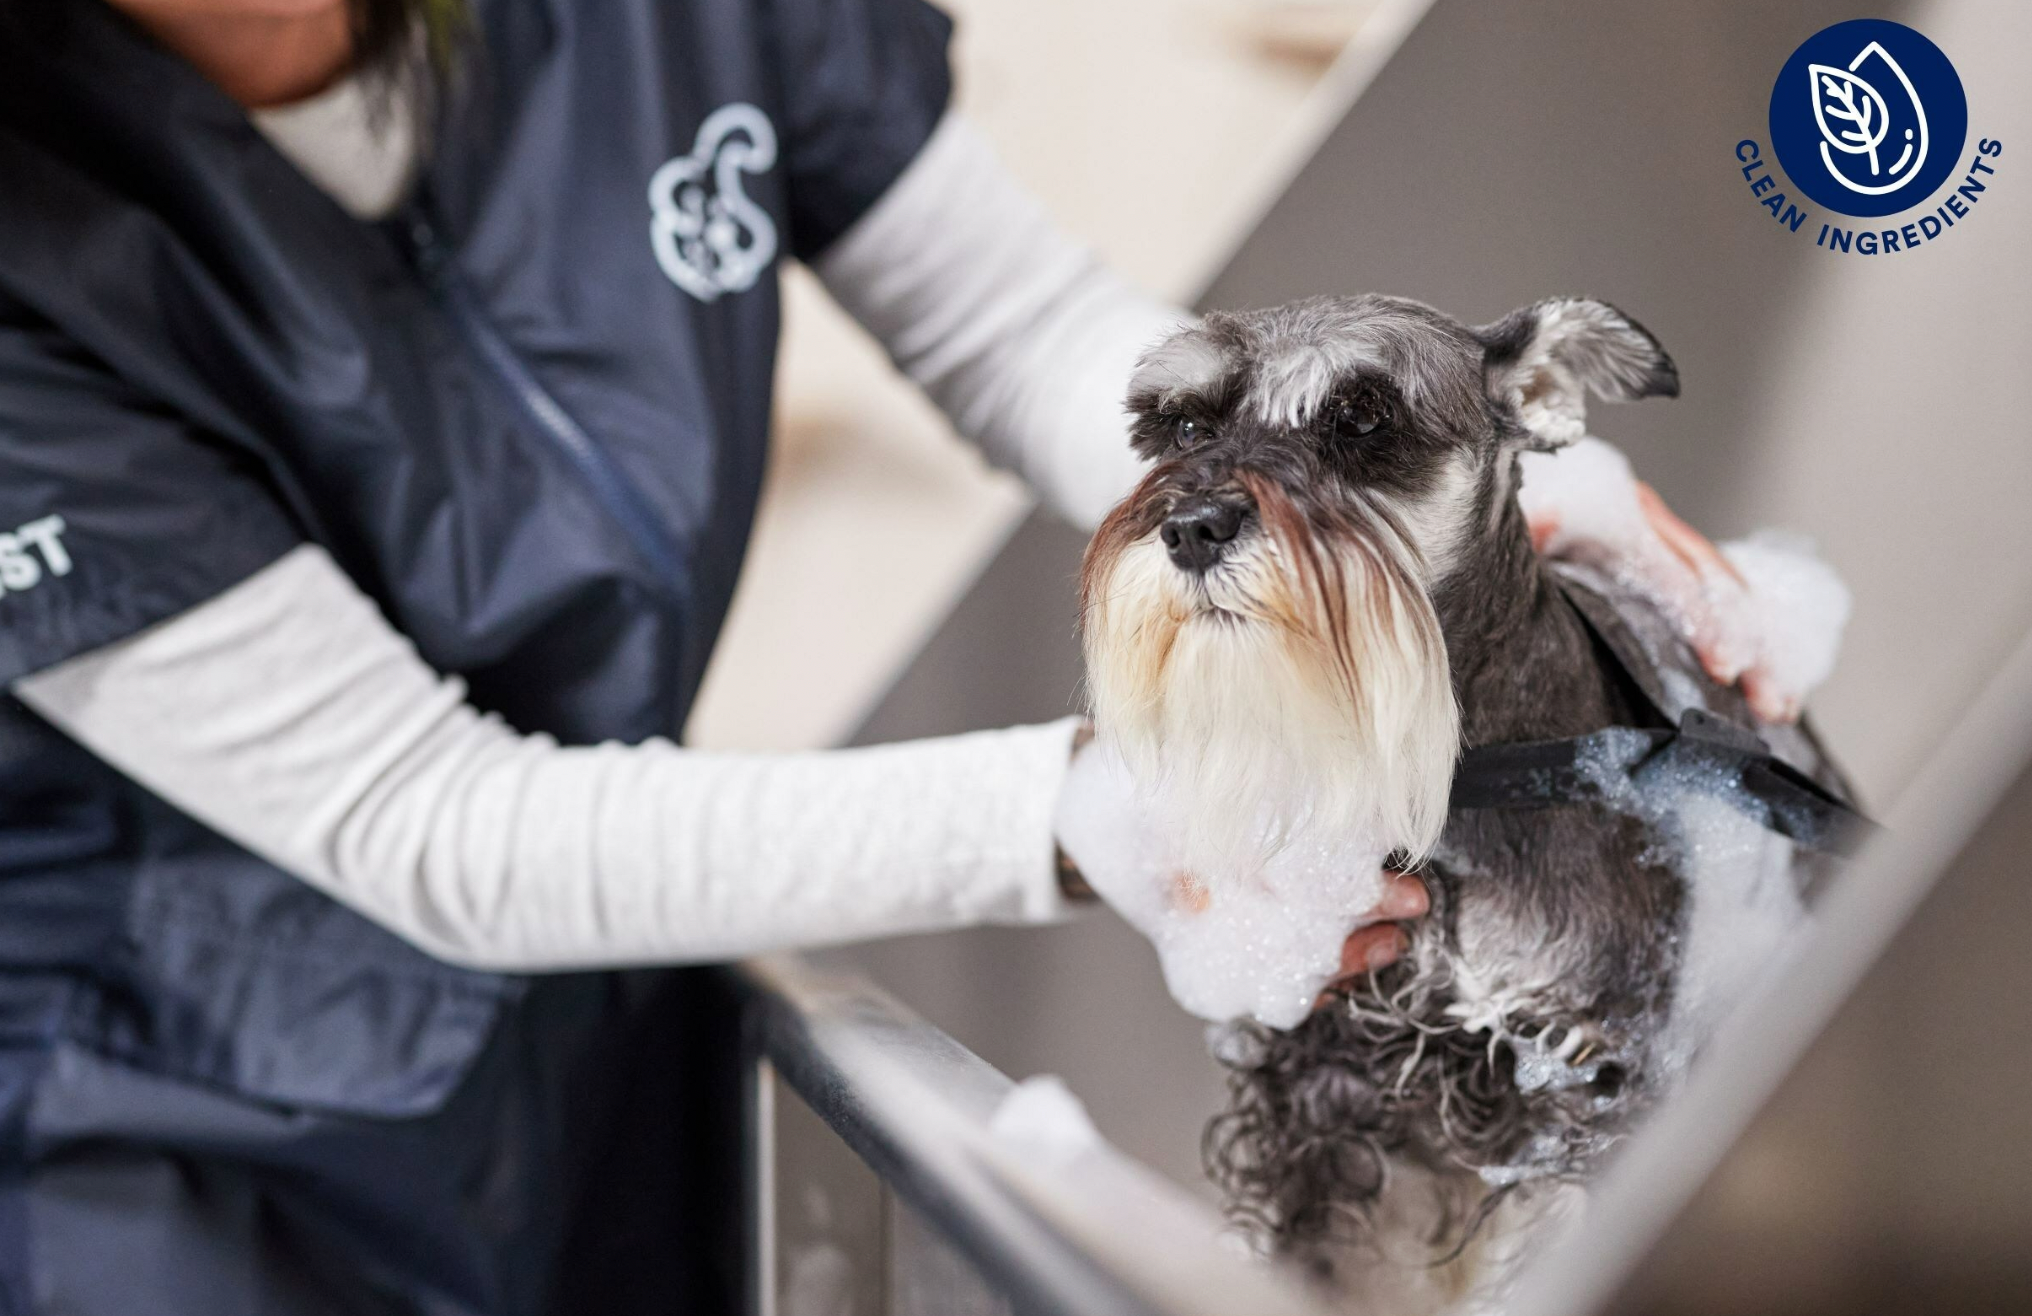 Petco launches clean grooming initiative